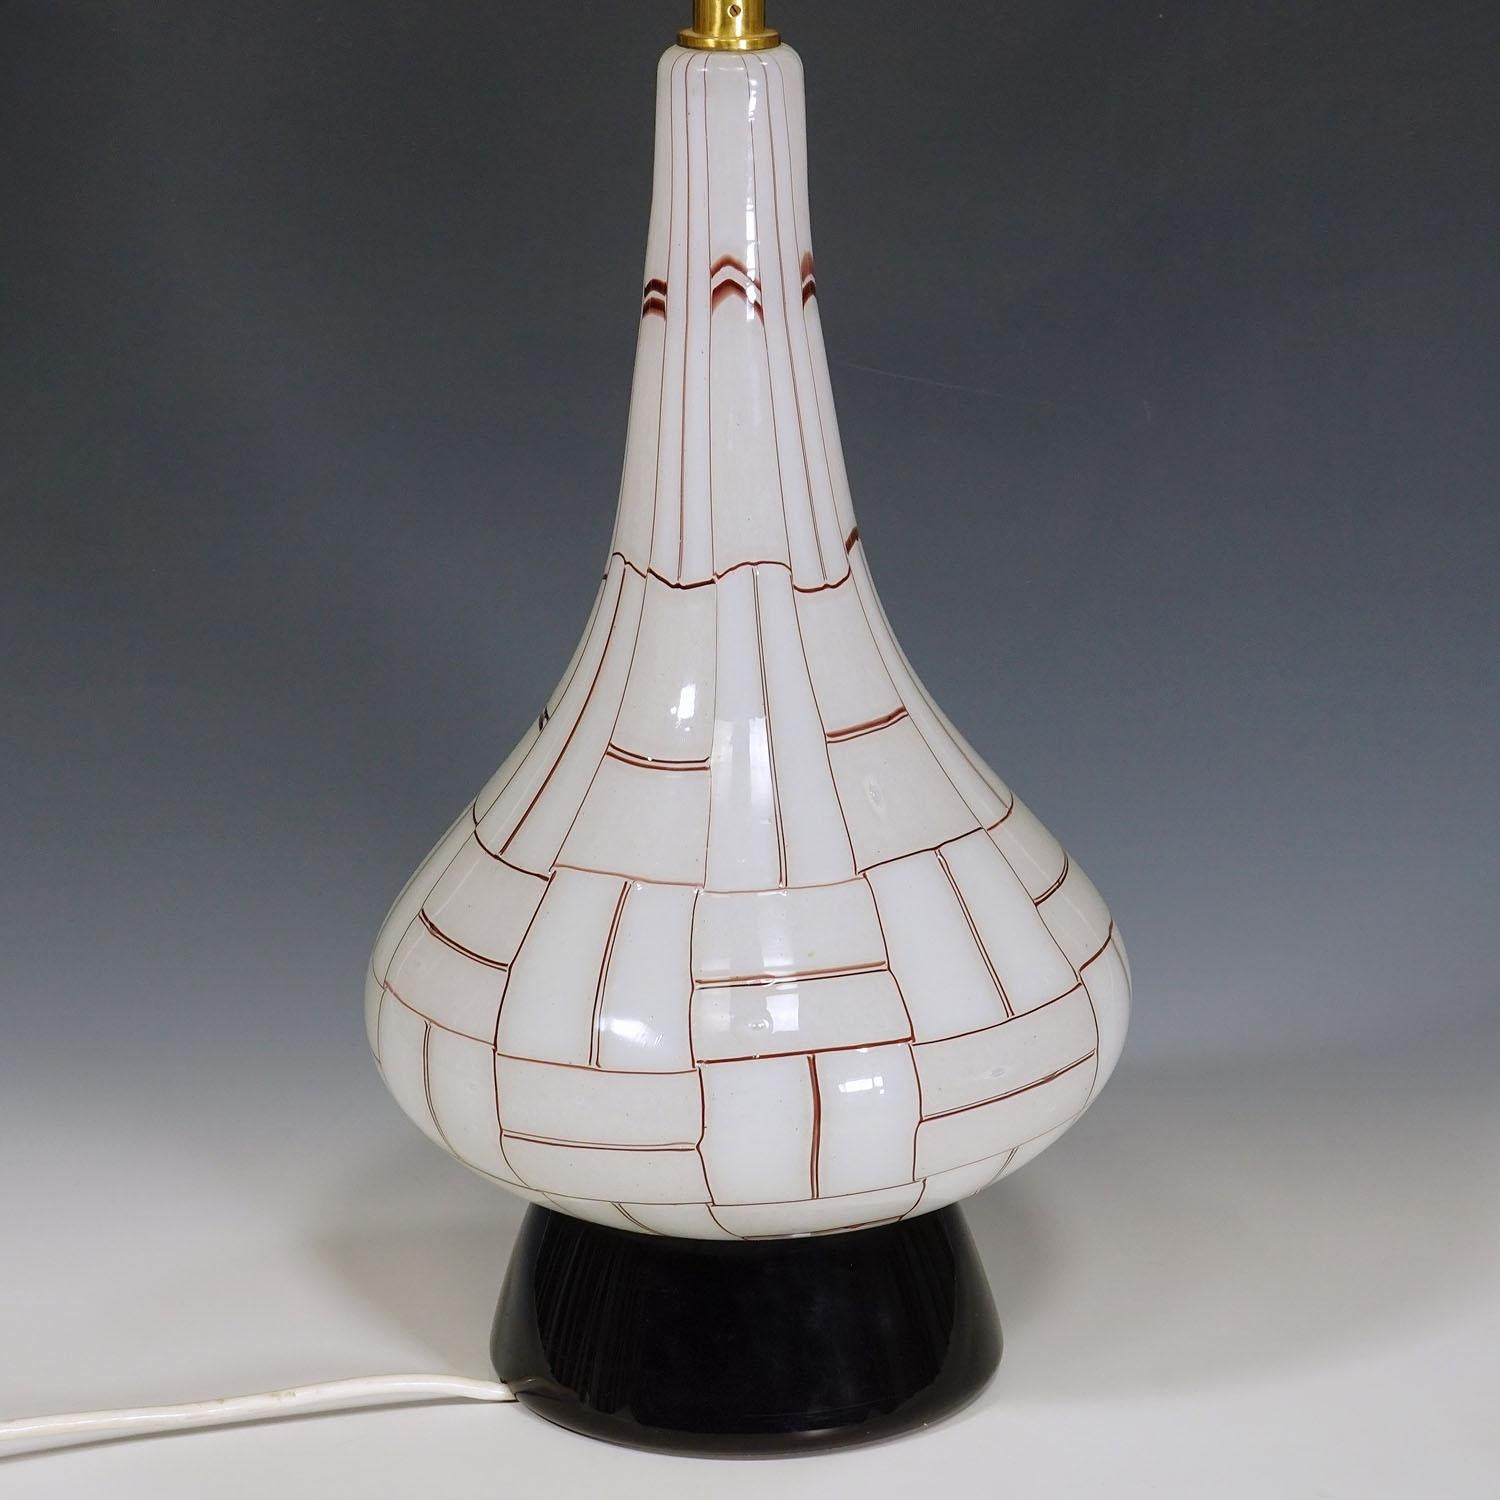 Vintage Barovier & Toso 'Sidone' Table Lamp, Murano circa 1960s In Good Condition For Sale In Berghuelen, DE